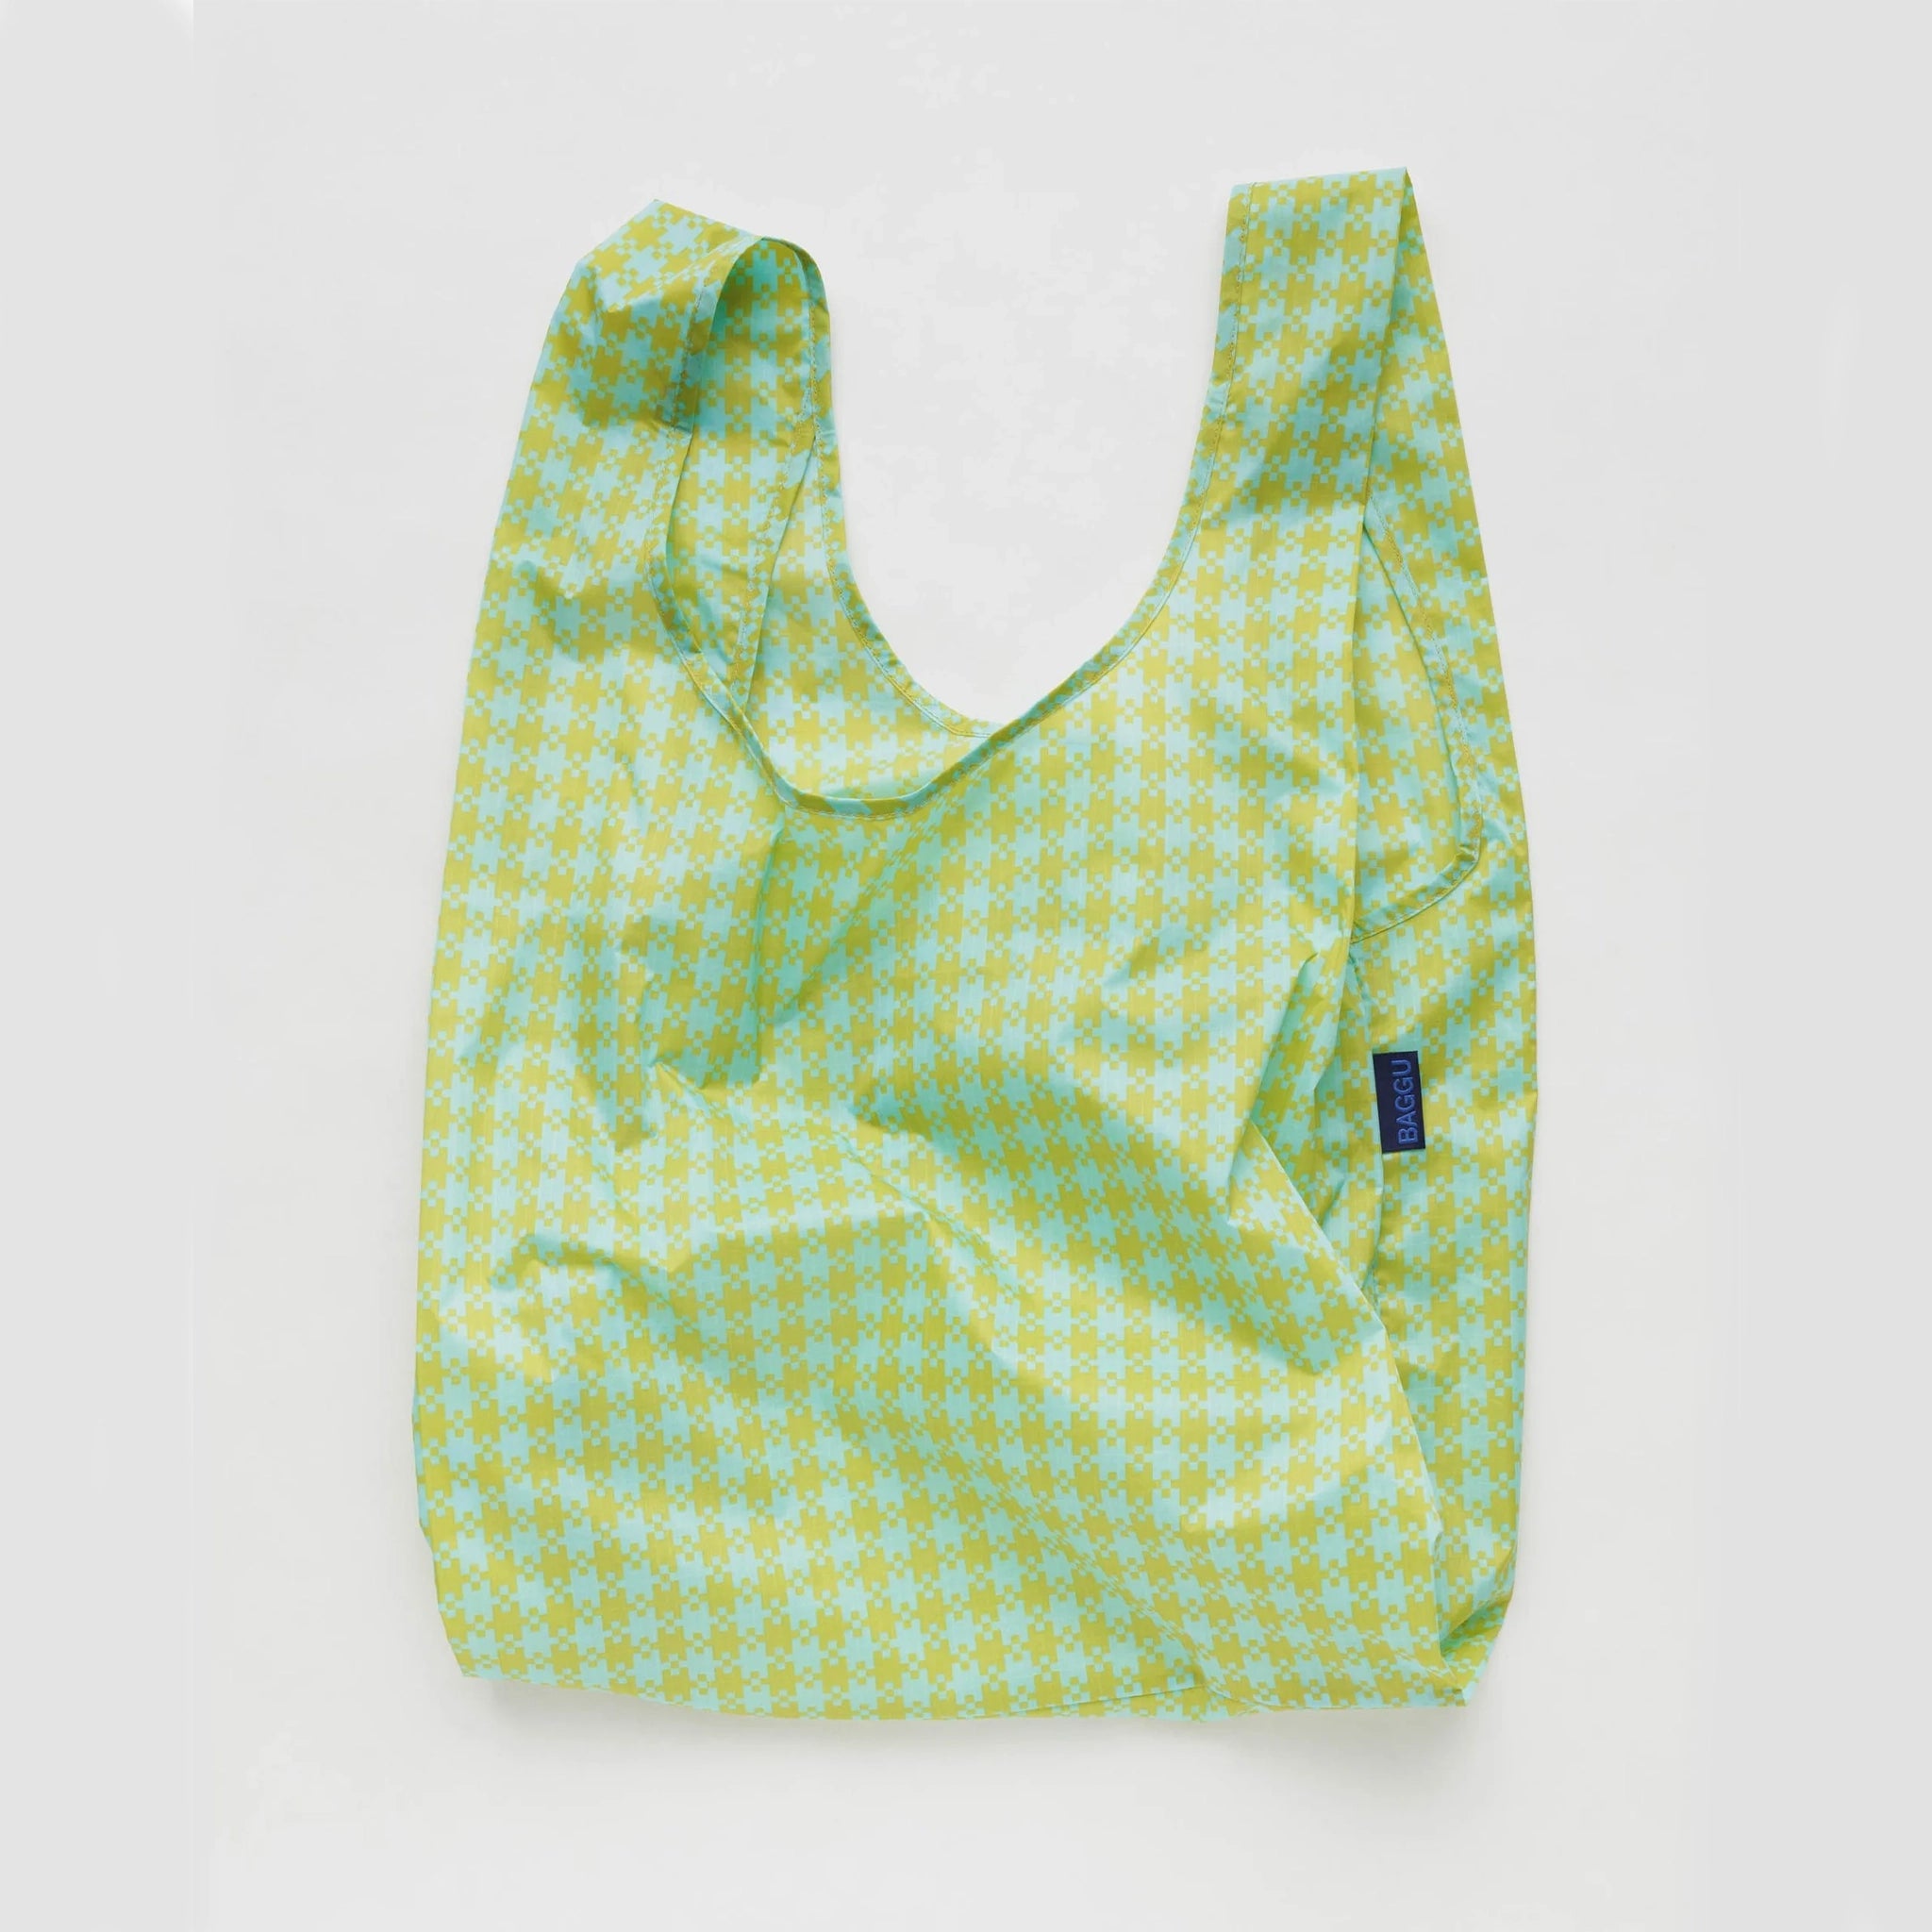 On a white background is a green and mint gingham printed nylon tote bag. 